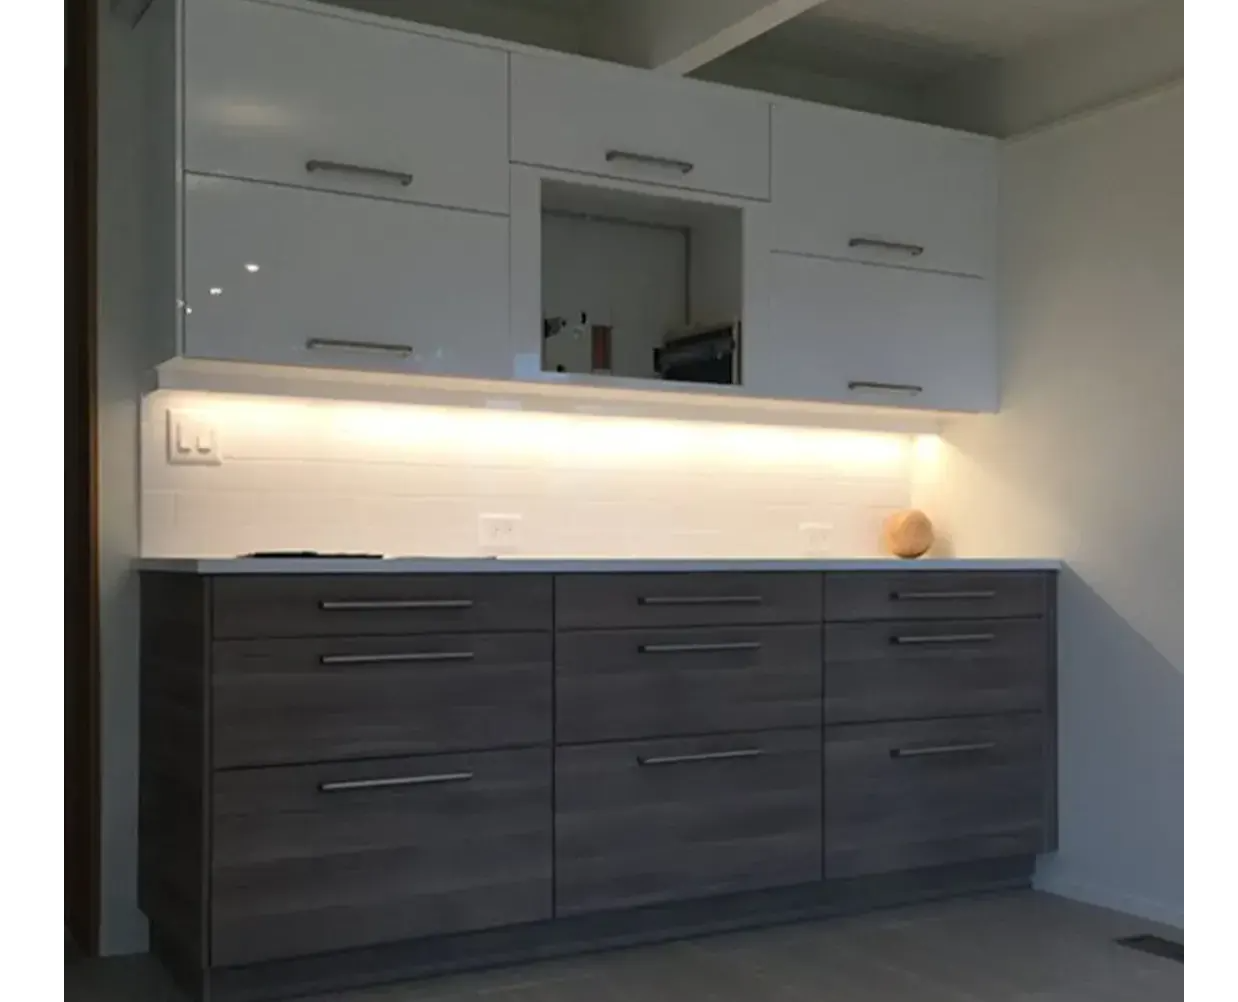 Under cabinet bright lighting with LED strip lights